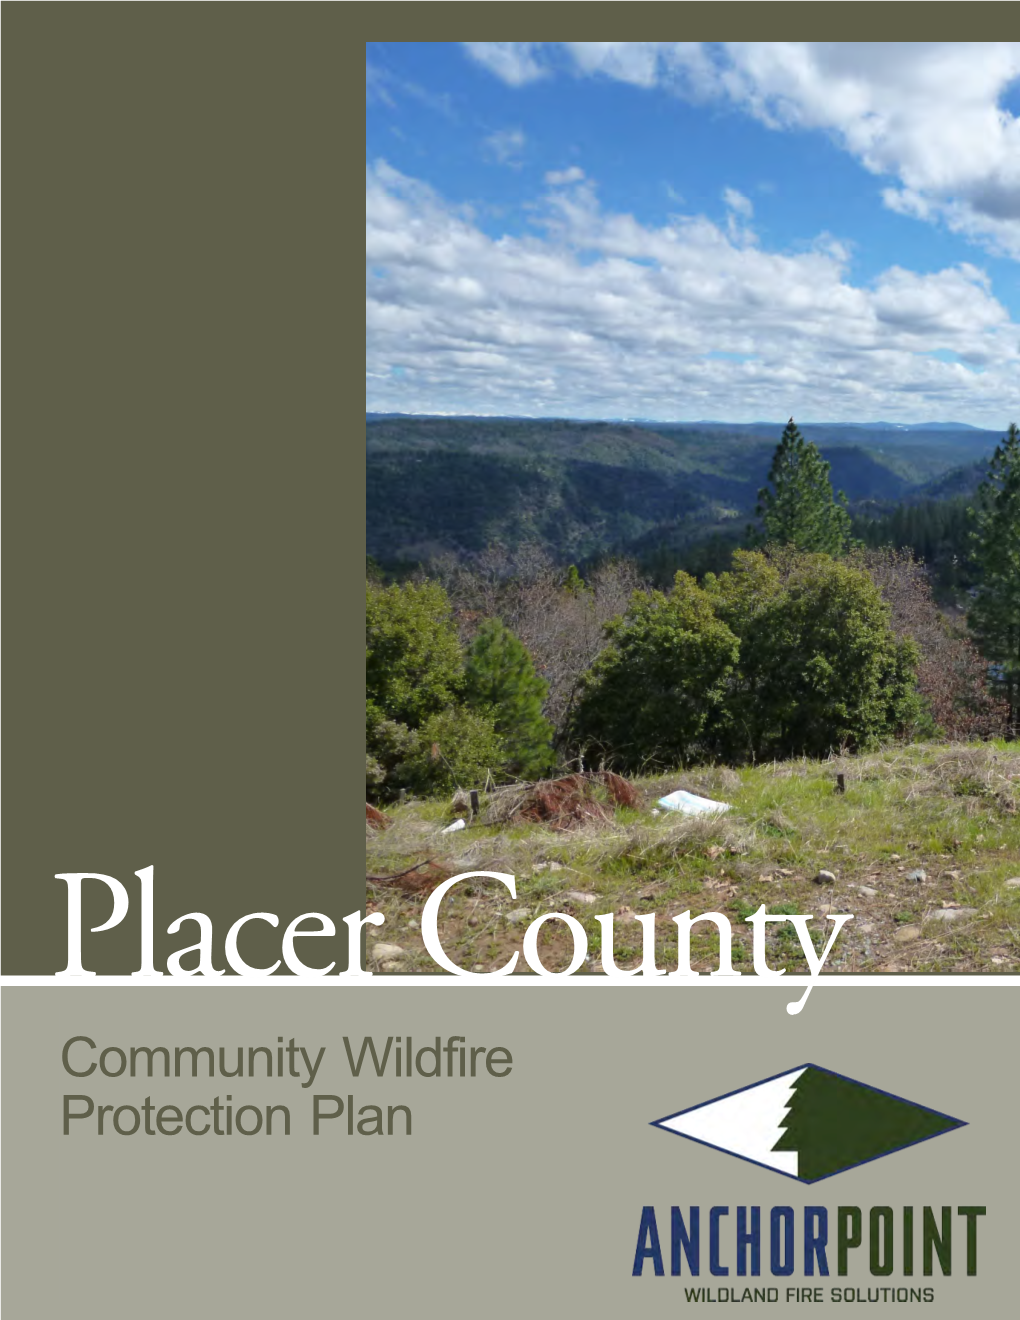 Community Wildfire Protection Plan 2012 Placer County, California Community Wildfire Protection Plan Prepared by Anchor Point Boulder, CO December 2012